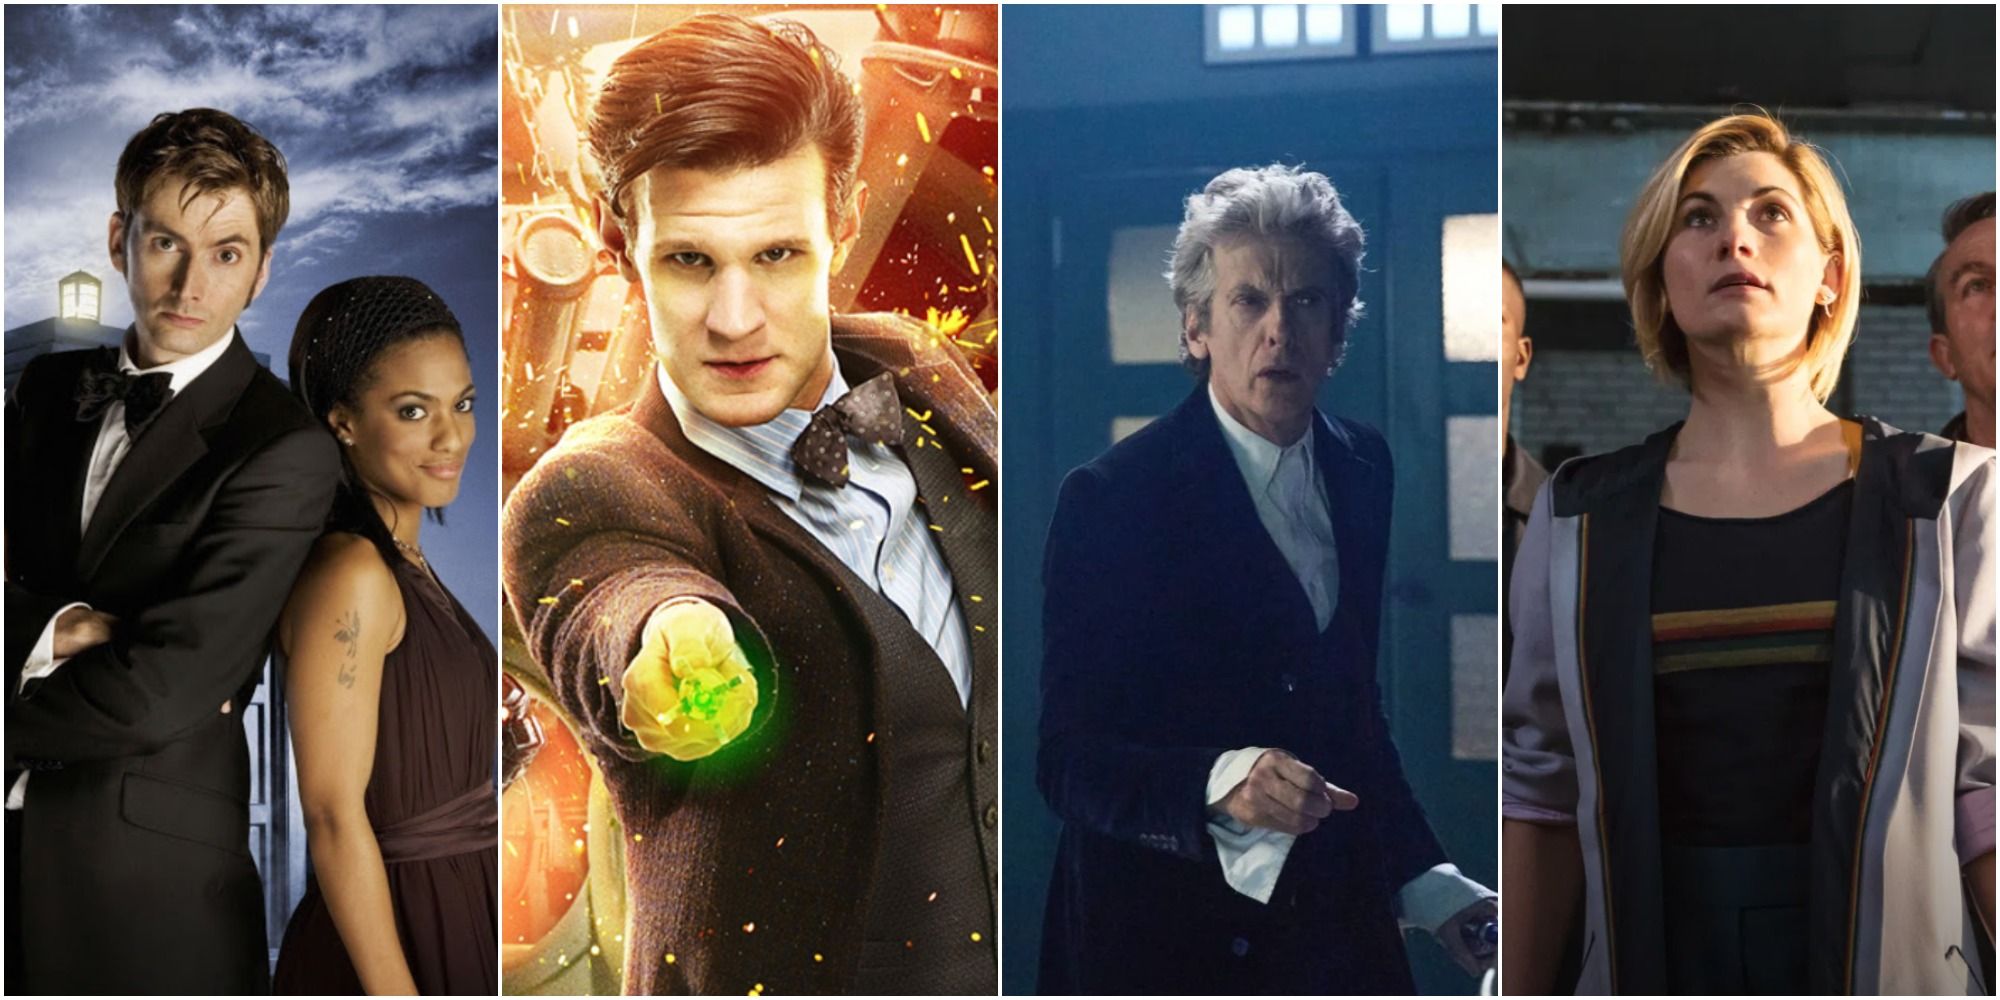 Doctor Who Collage of Doctors from 4 seasons